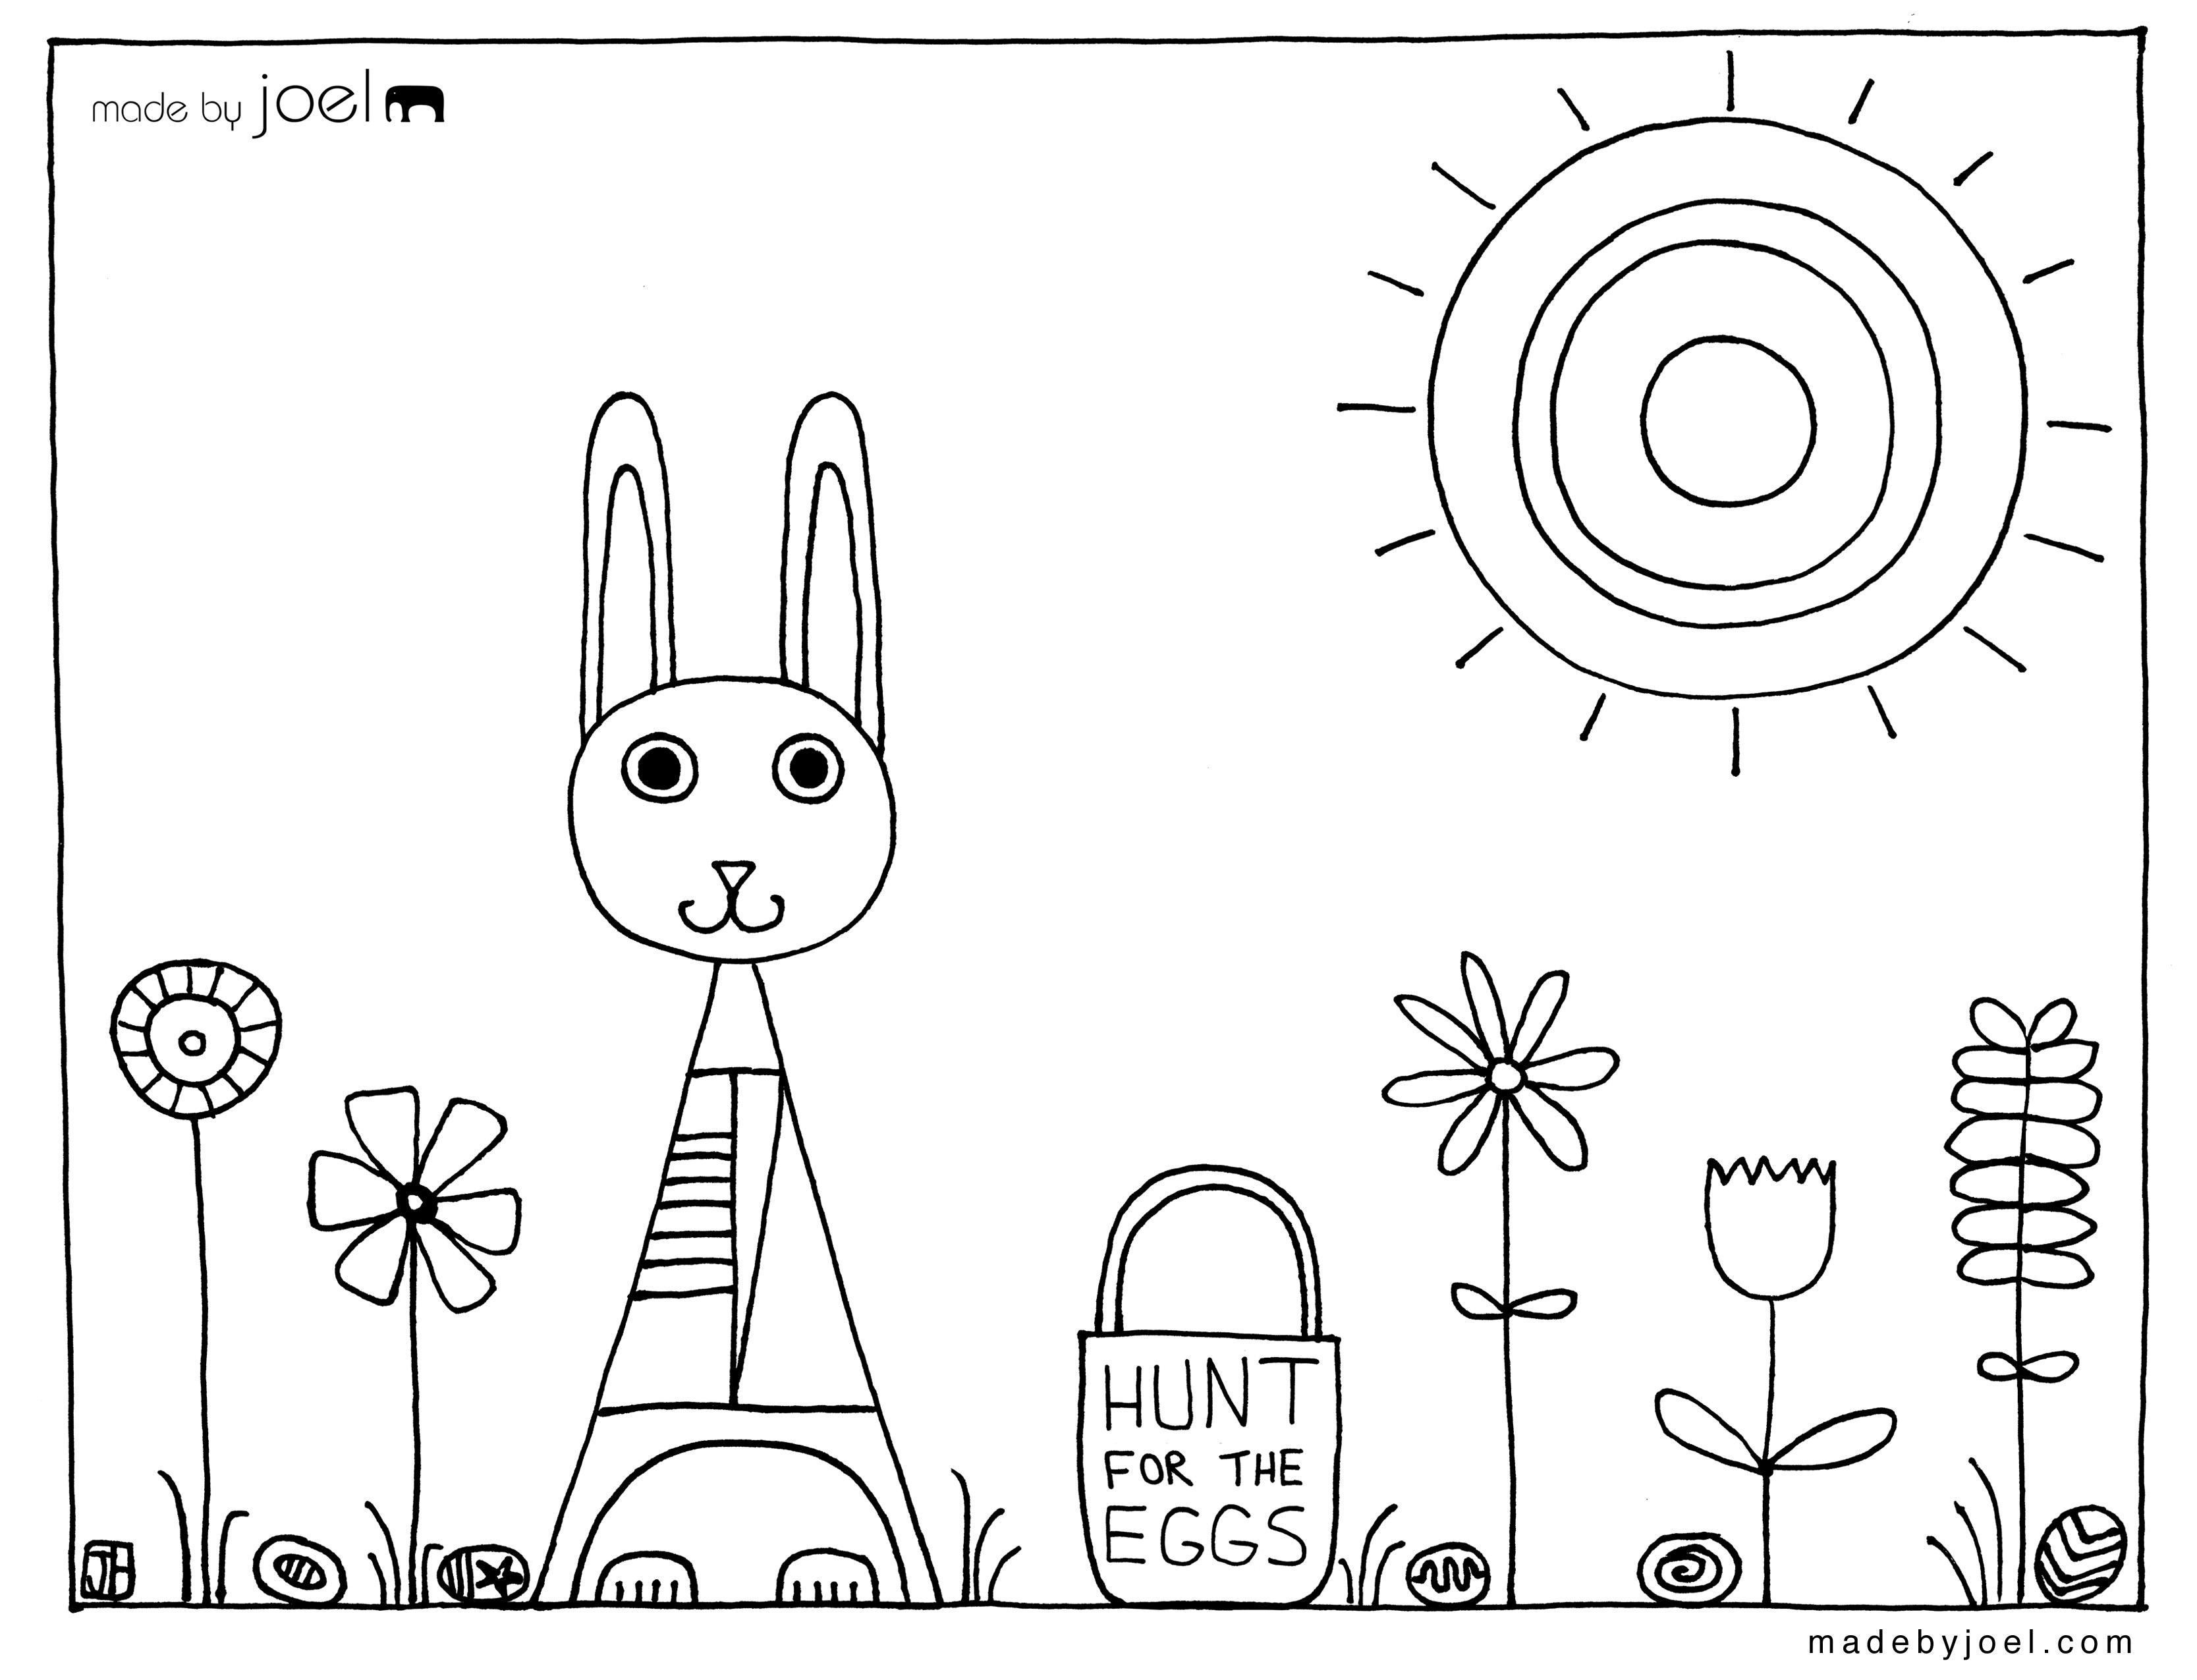 https://madebyjoel.com/wp-content/uploads/2012/04/Made-by-Joel-Easter-Coloring-Sheet-Hunt-for-the-Eggs.jpg